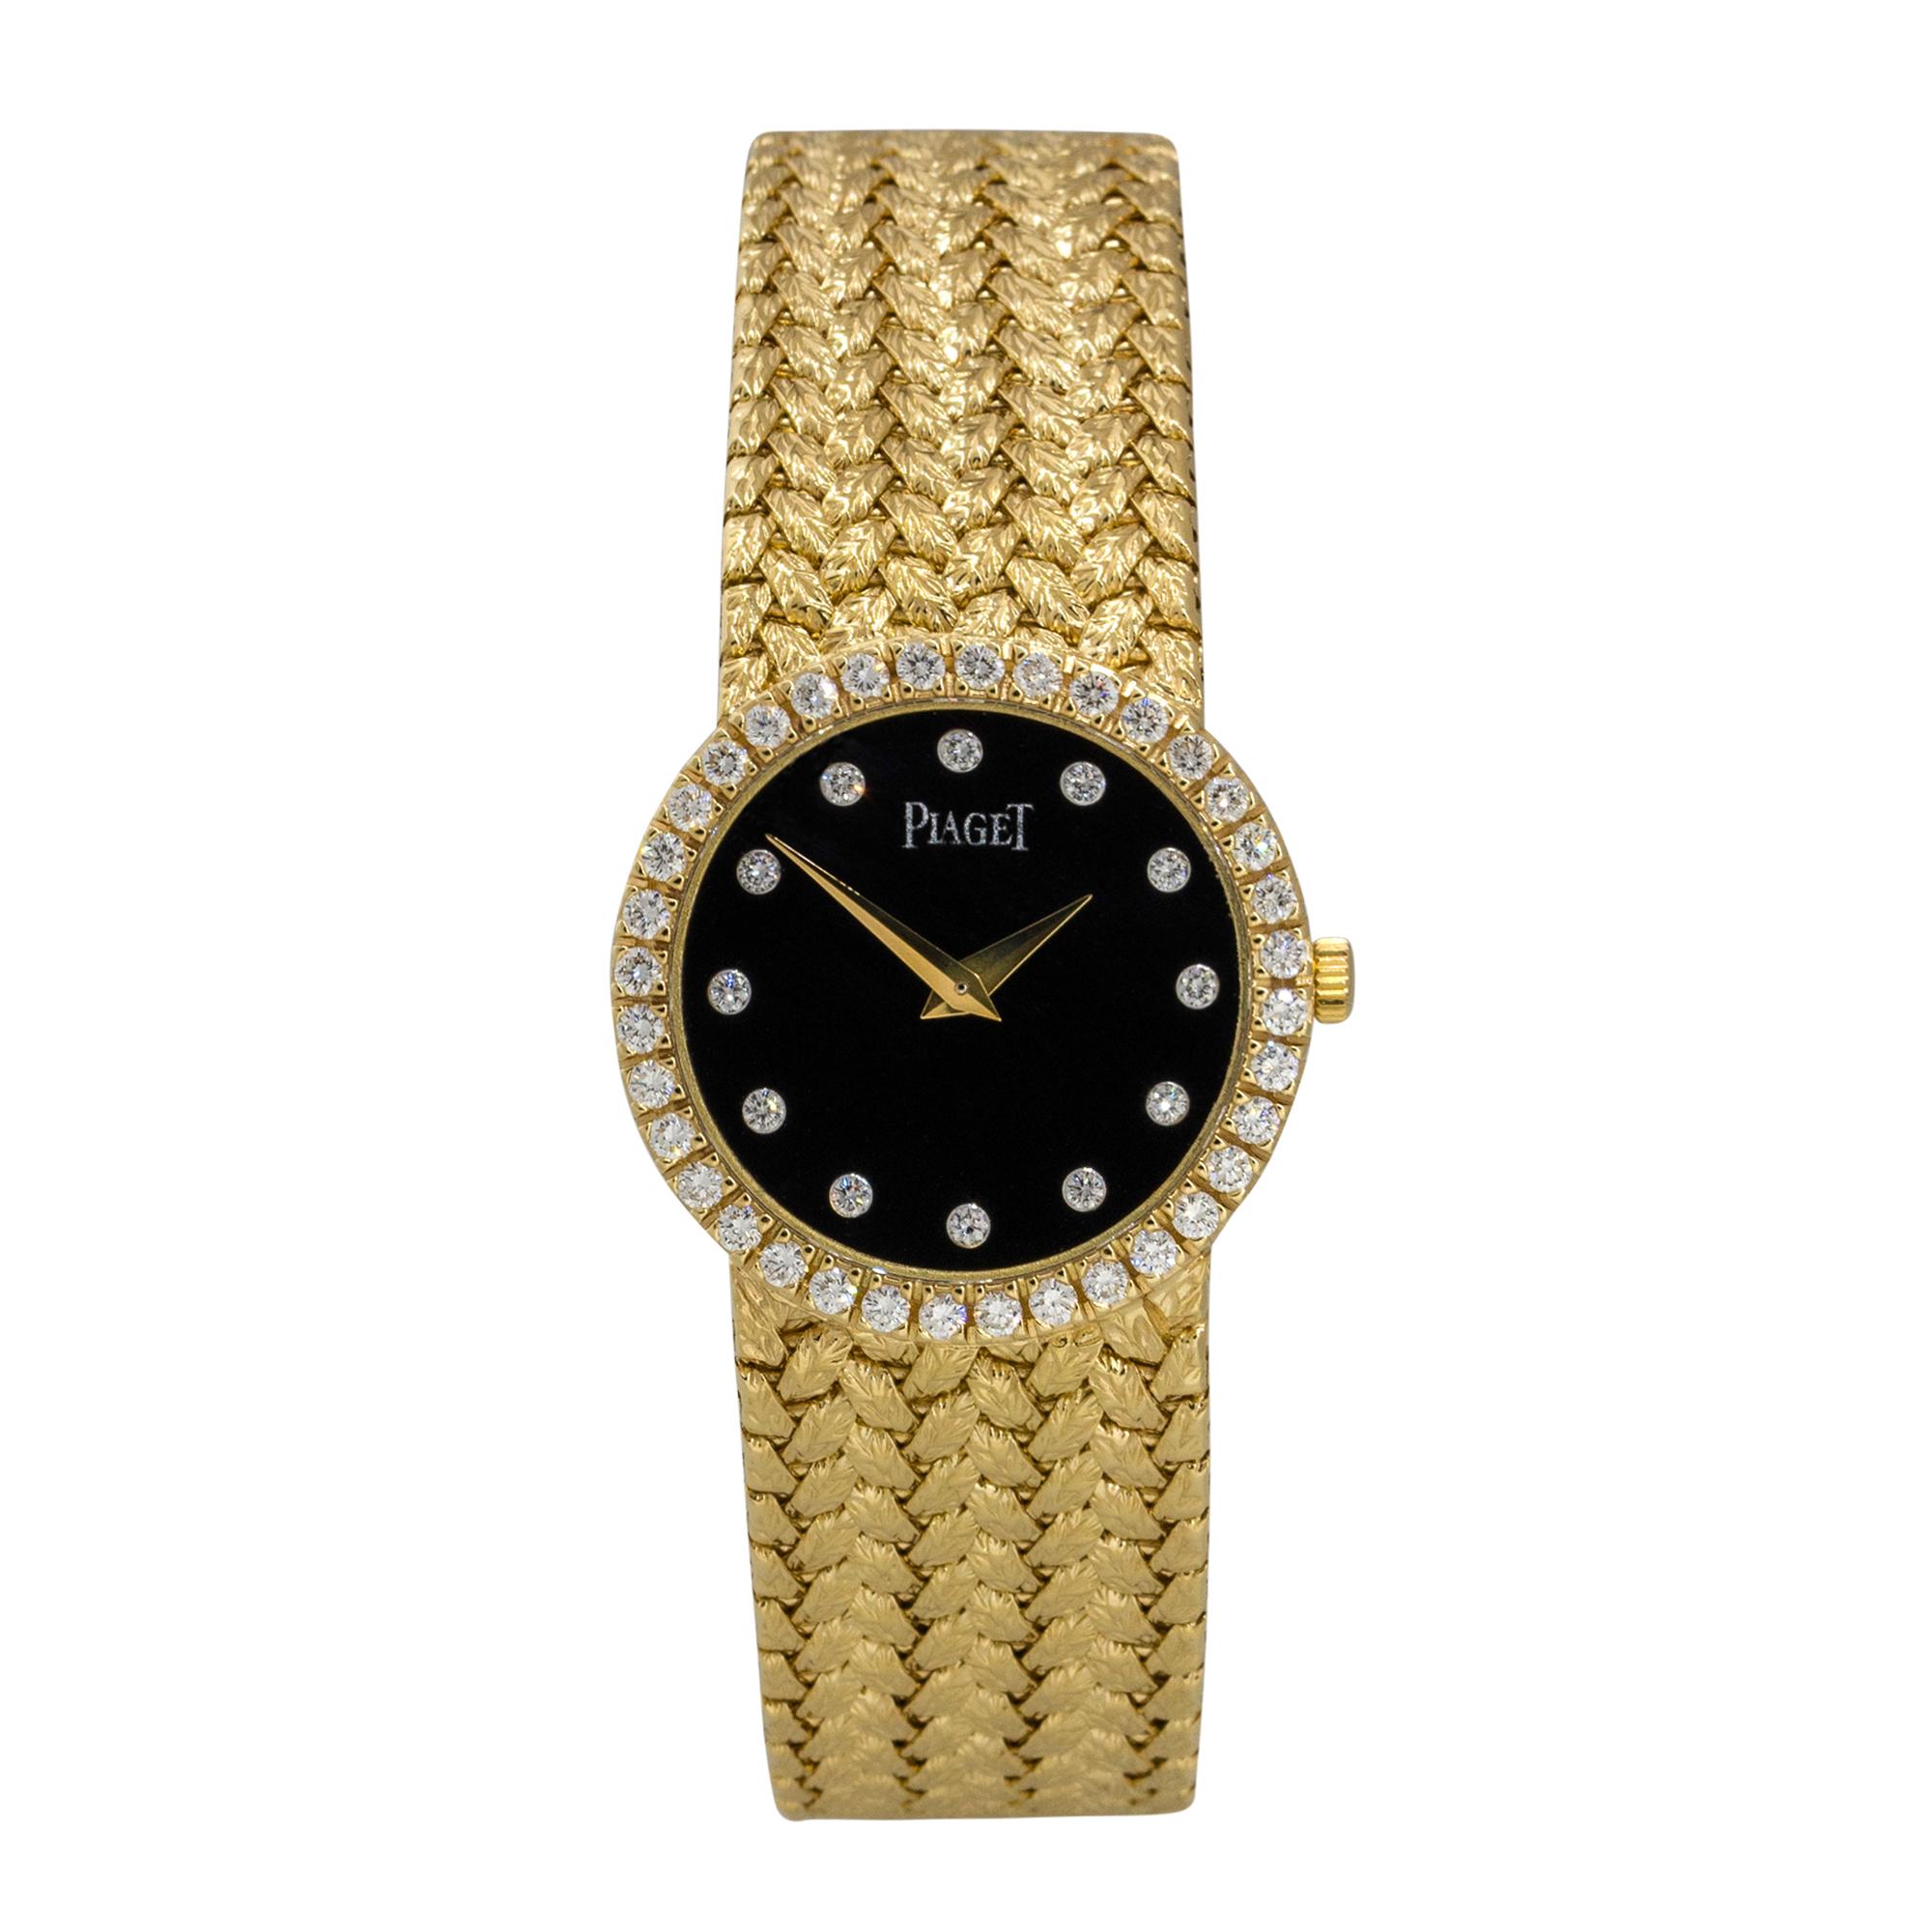 Brand: Piaget
Case Material: 18k Yellow Gold
Case Diameter: 24mm
Crystal: Sapphire Crystal
Bezel: 18k Yellow Gold Diamond bezel
Dial: Black Onyx dial with yellow gold hands and Diamond hour markers
Bracelet: 18k Yellow Gold bracelet
Size: Will fit a